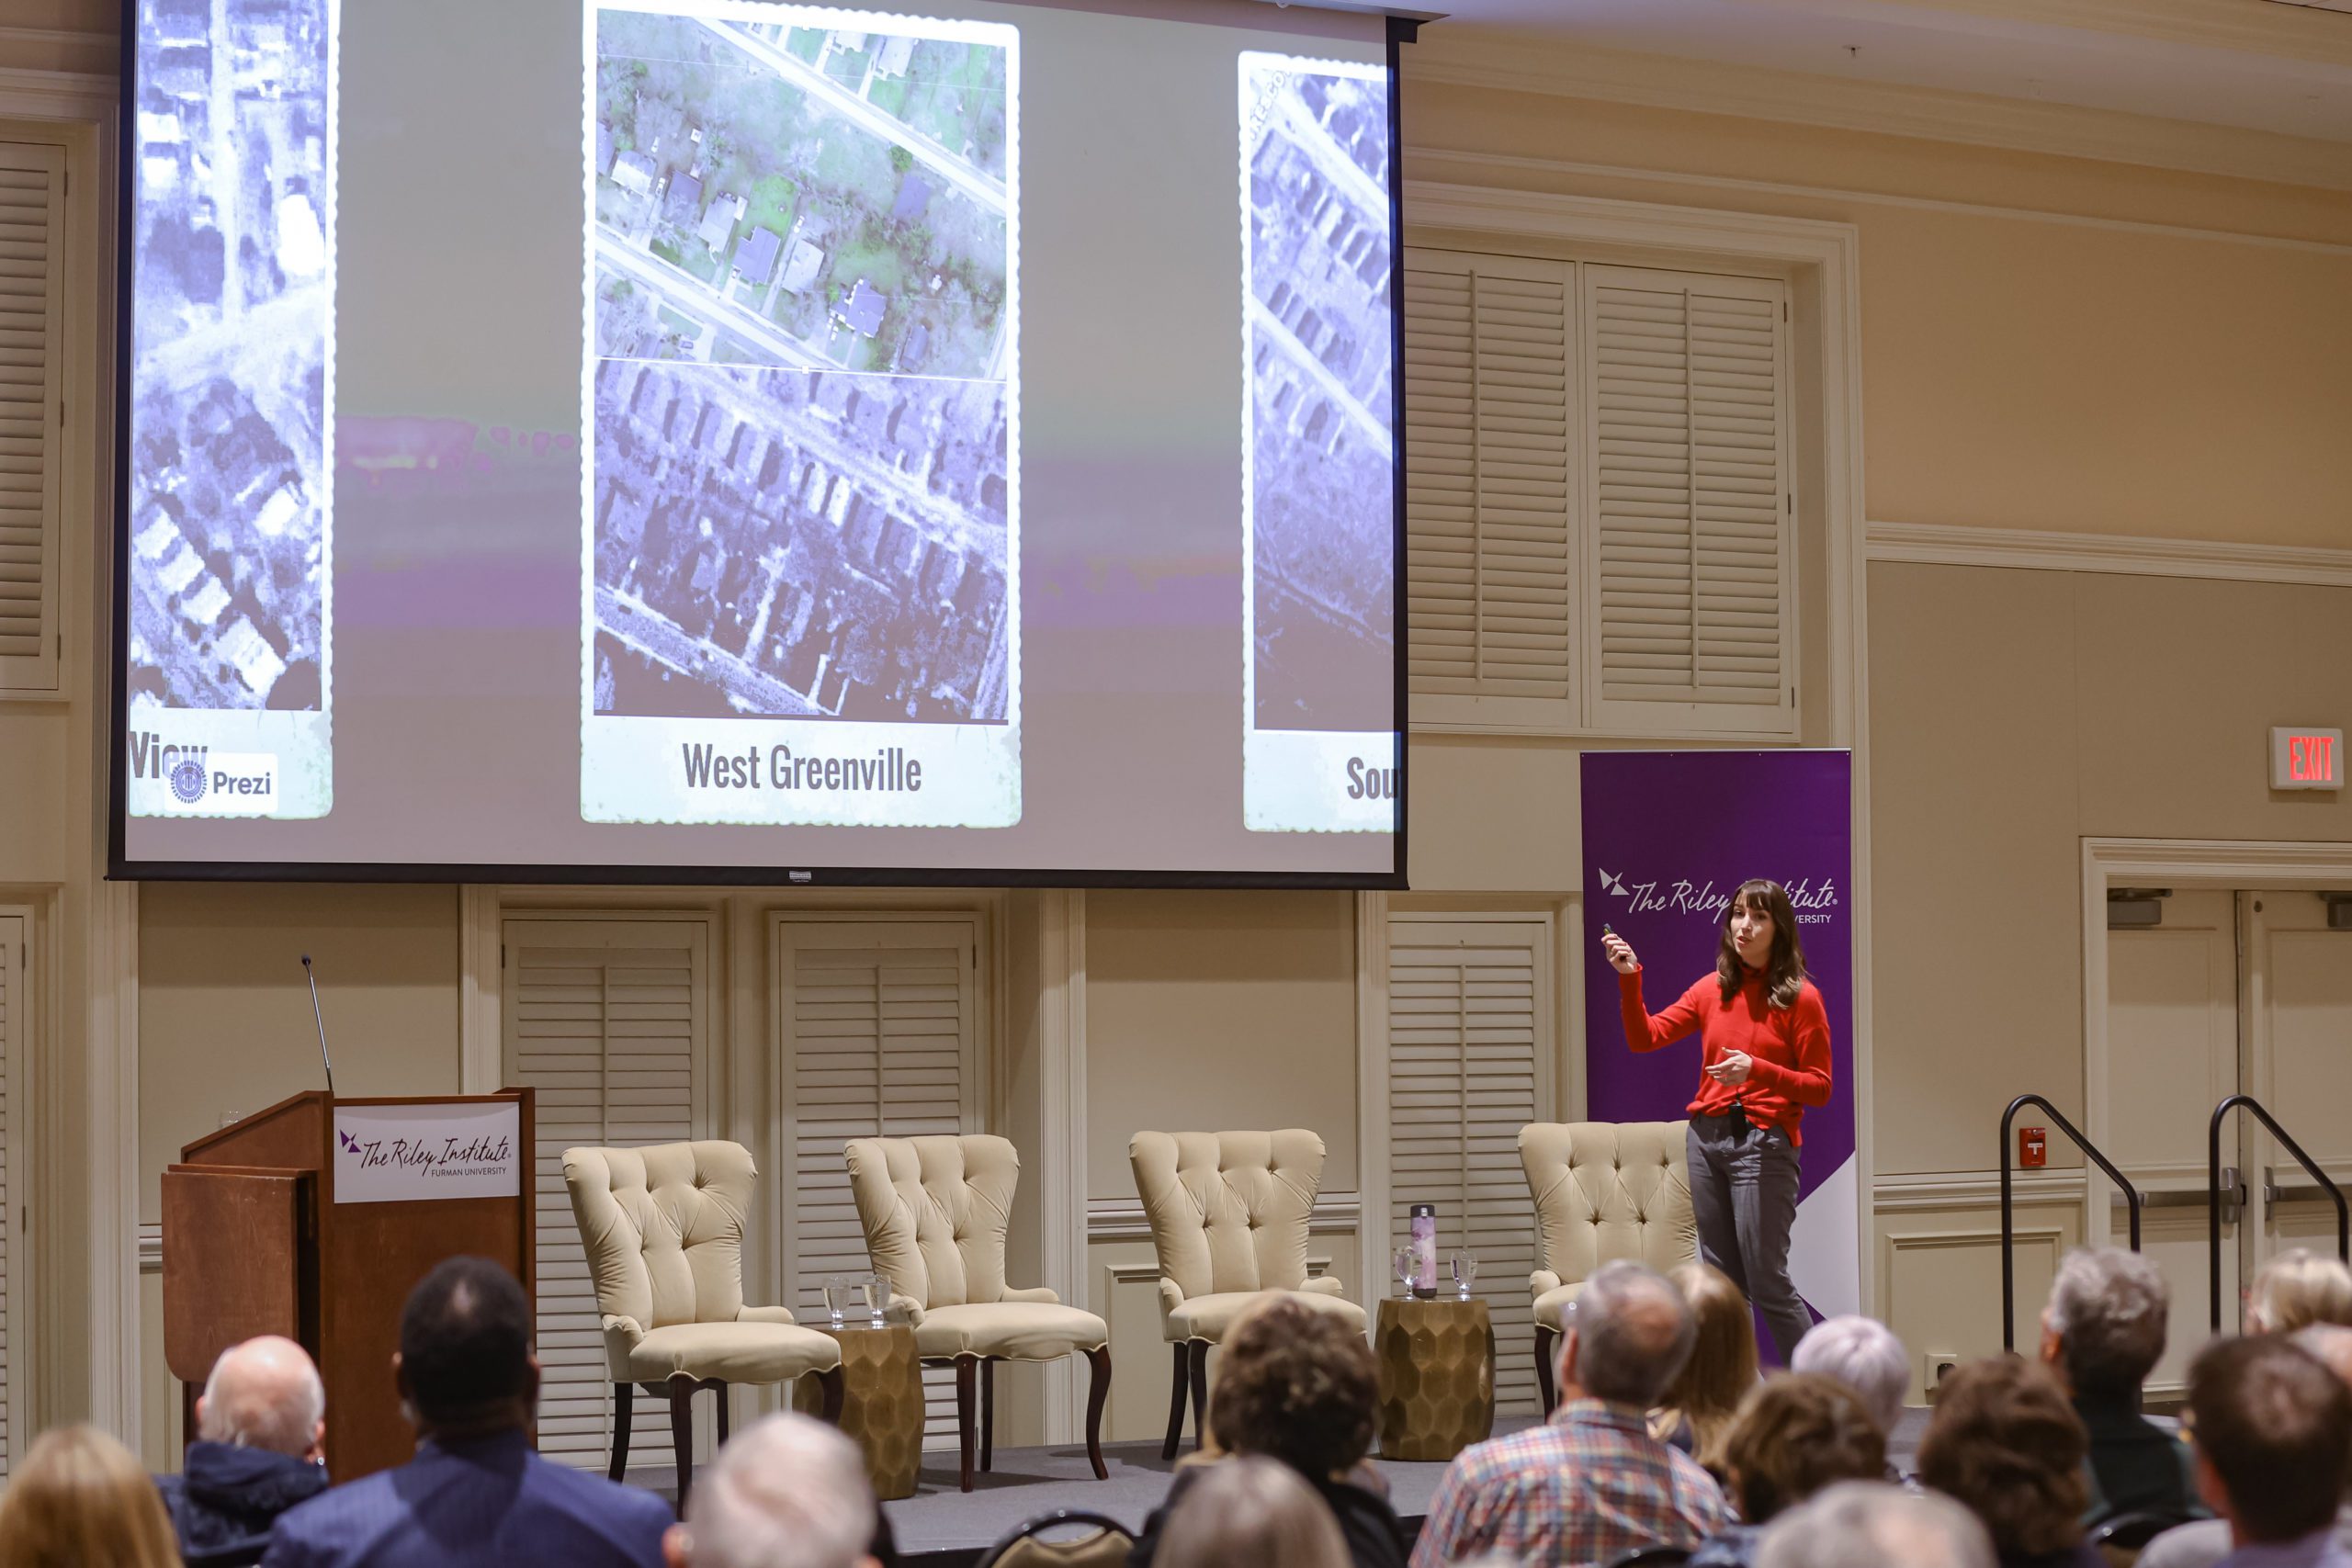 Tina Belge, advocacy and community engagement manager at Greenville Housing Fund, presented an overview of gentrification in Greenville and the historical transitions of Greenville from a mill town to a vibrant city. 